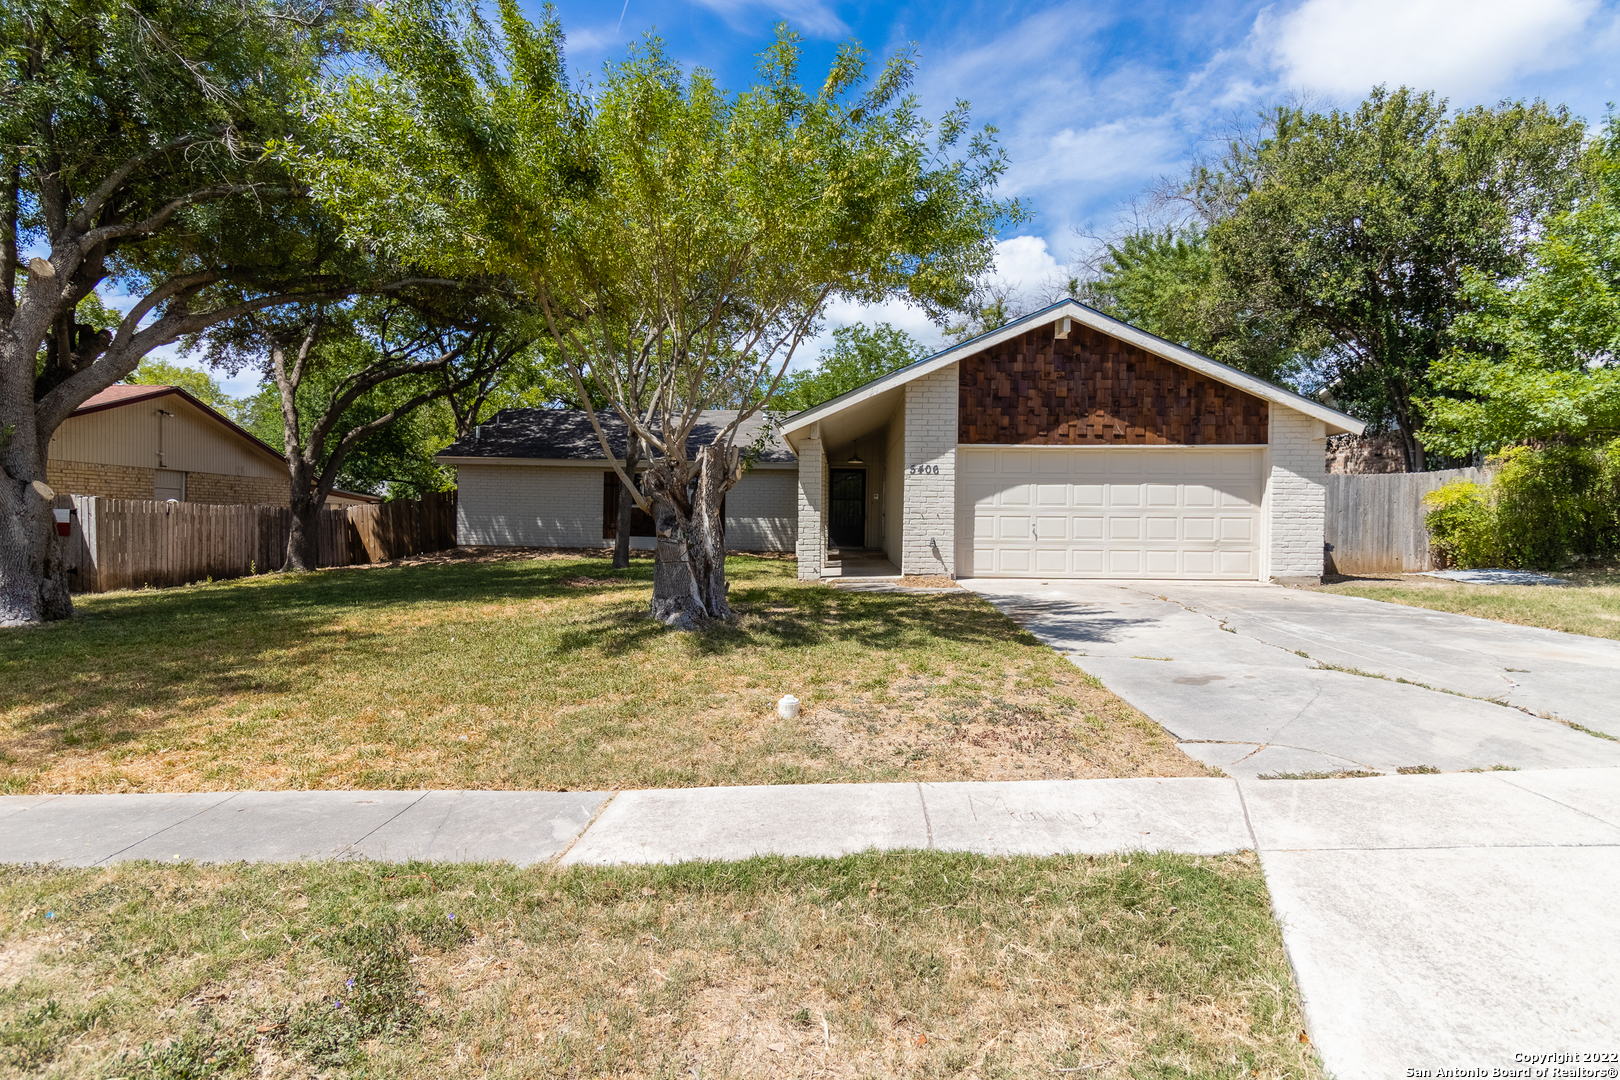 Single story home with a pool. Open floor plan with granite counter tops in the kitchen and bathrooms. Sparkling pool with recent new tile, plaster, and equipment. New roof installed in May, new AC unit,   Schedule a showing today!